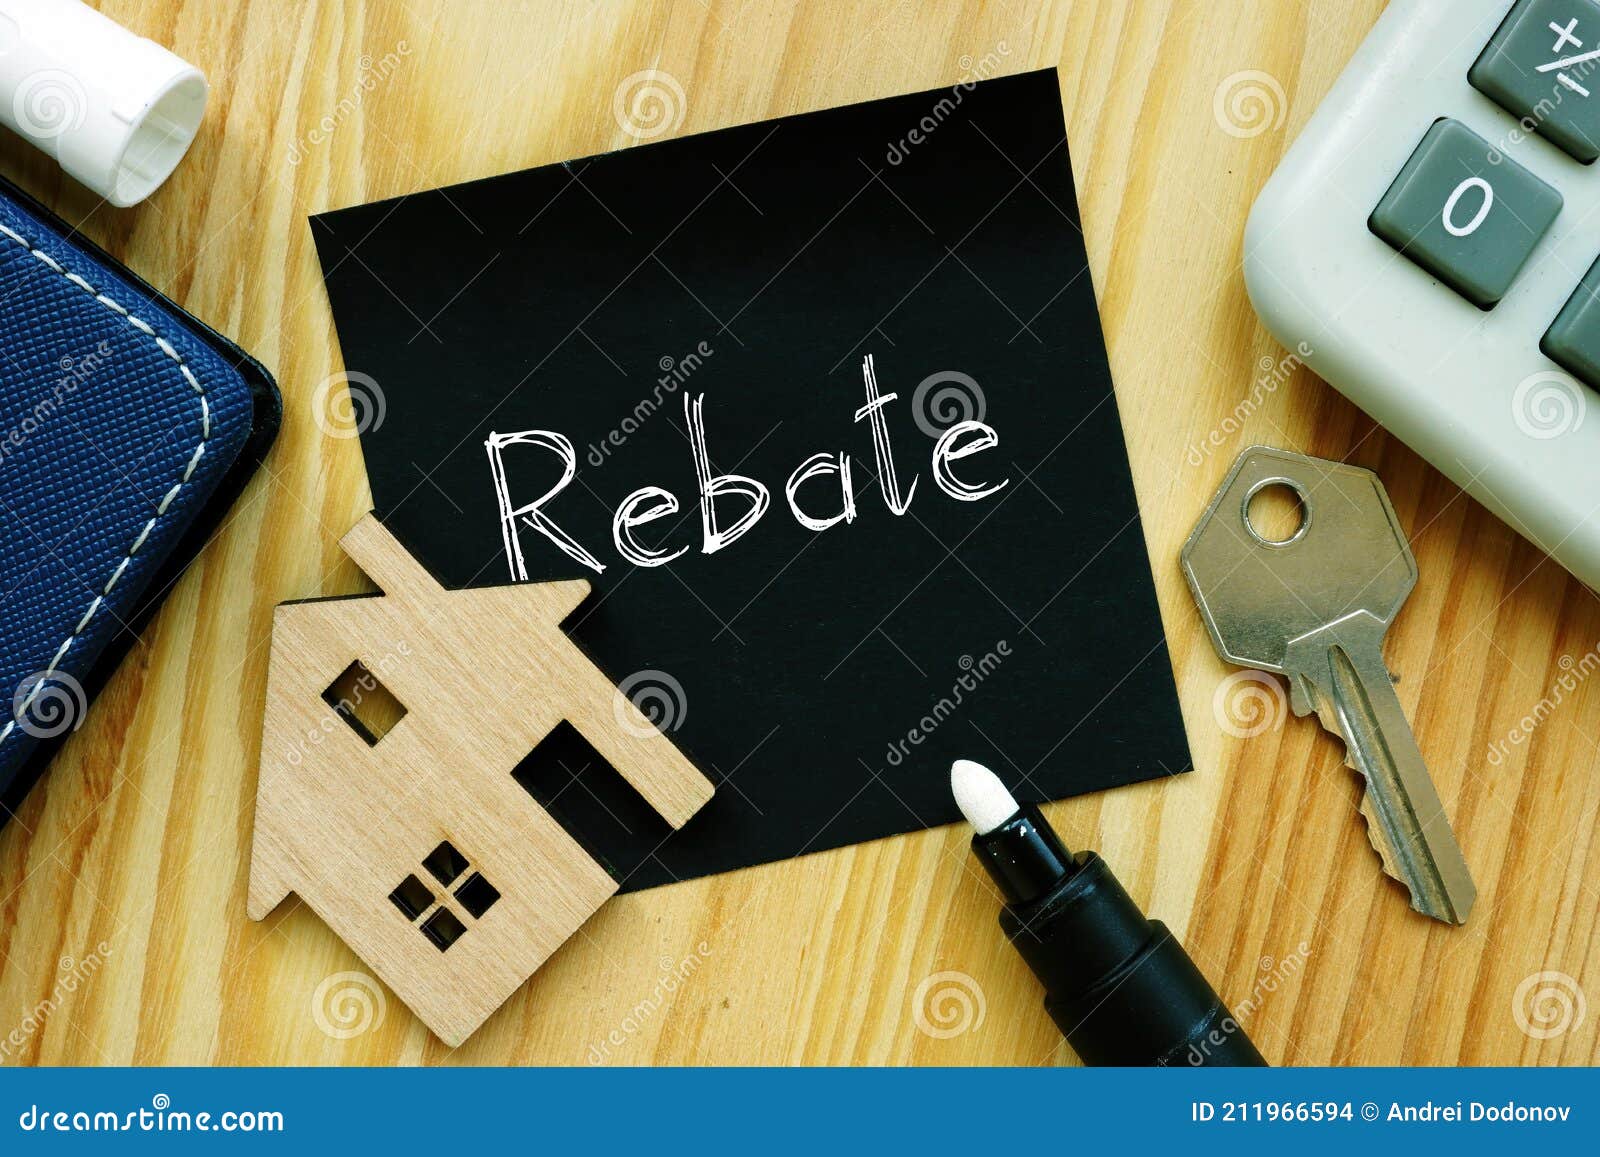 rebate-is-shown-on-the-business-photo-using-the-text-stock-photo